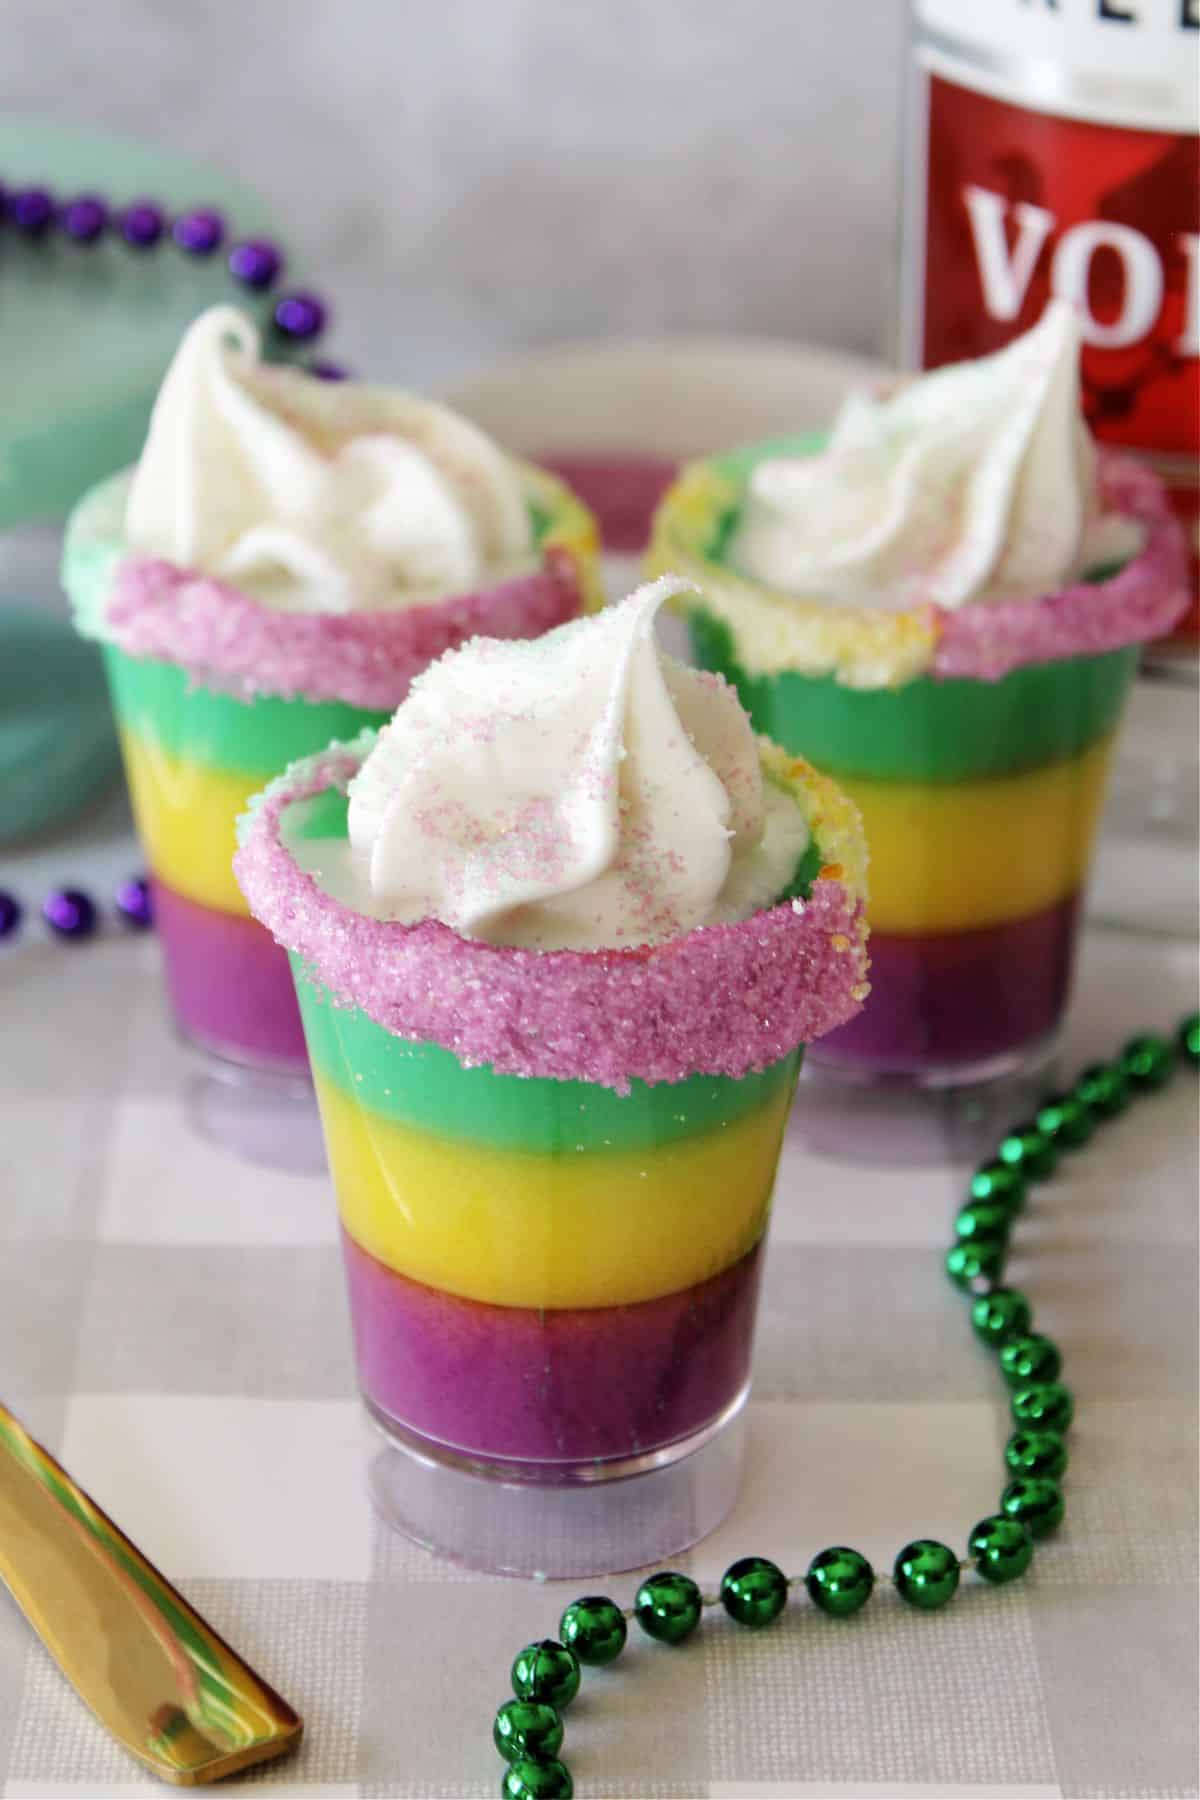 purple, yellow, and green layered pudding shots with whipped cream and purple sanding sugar